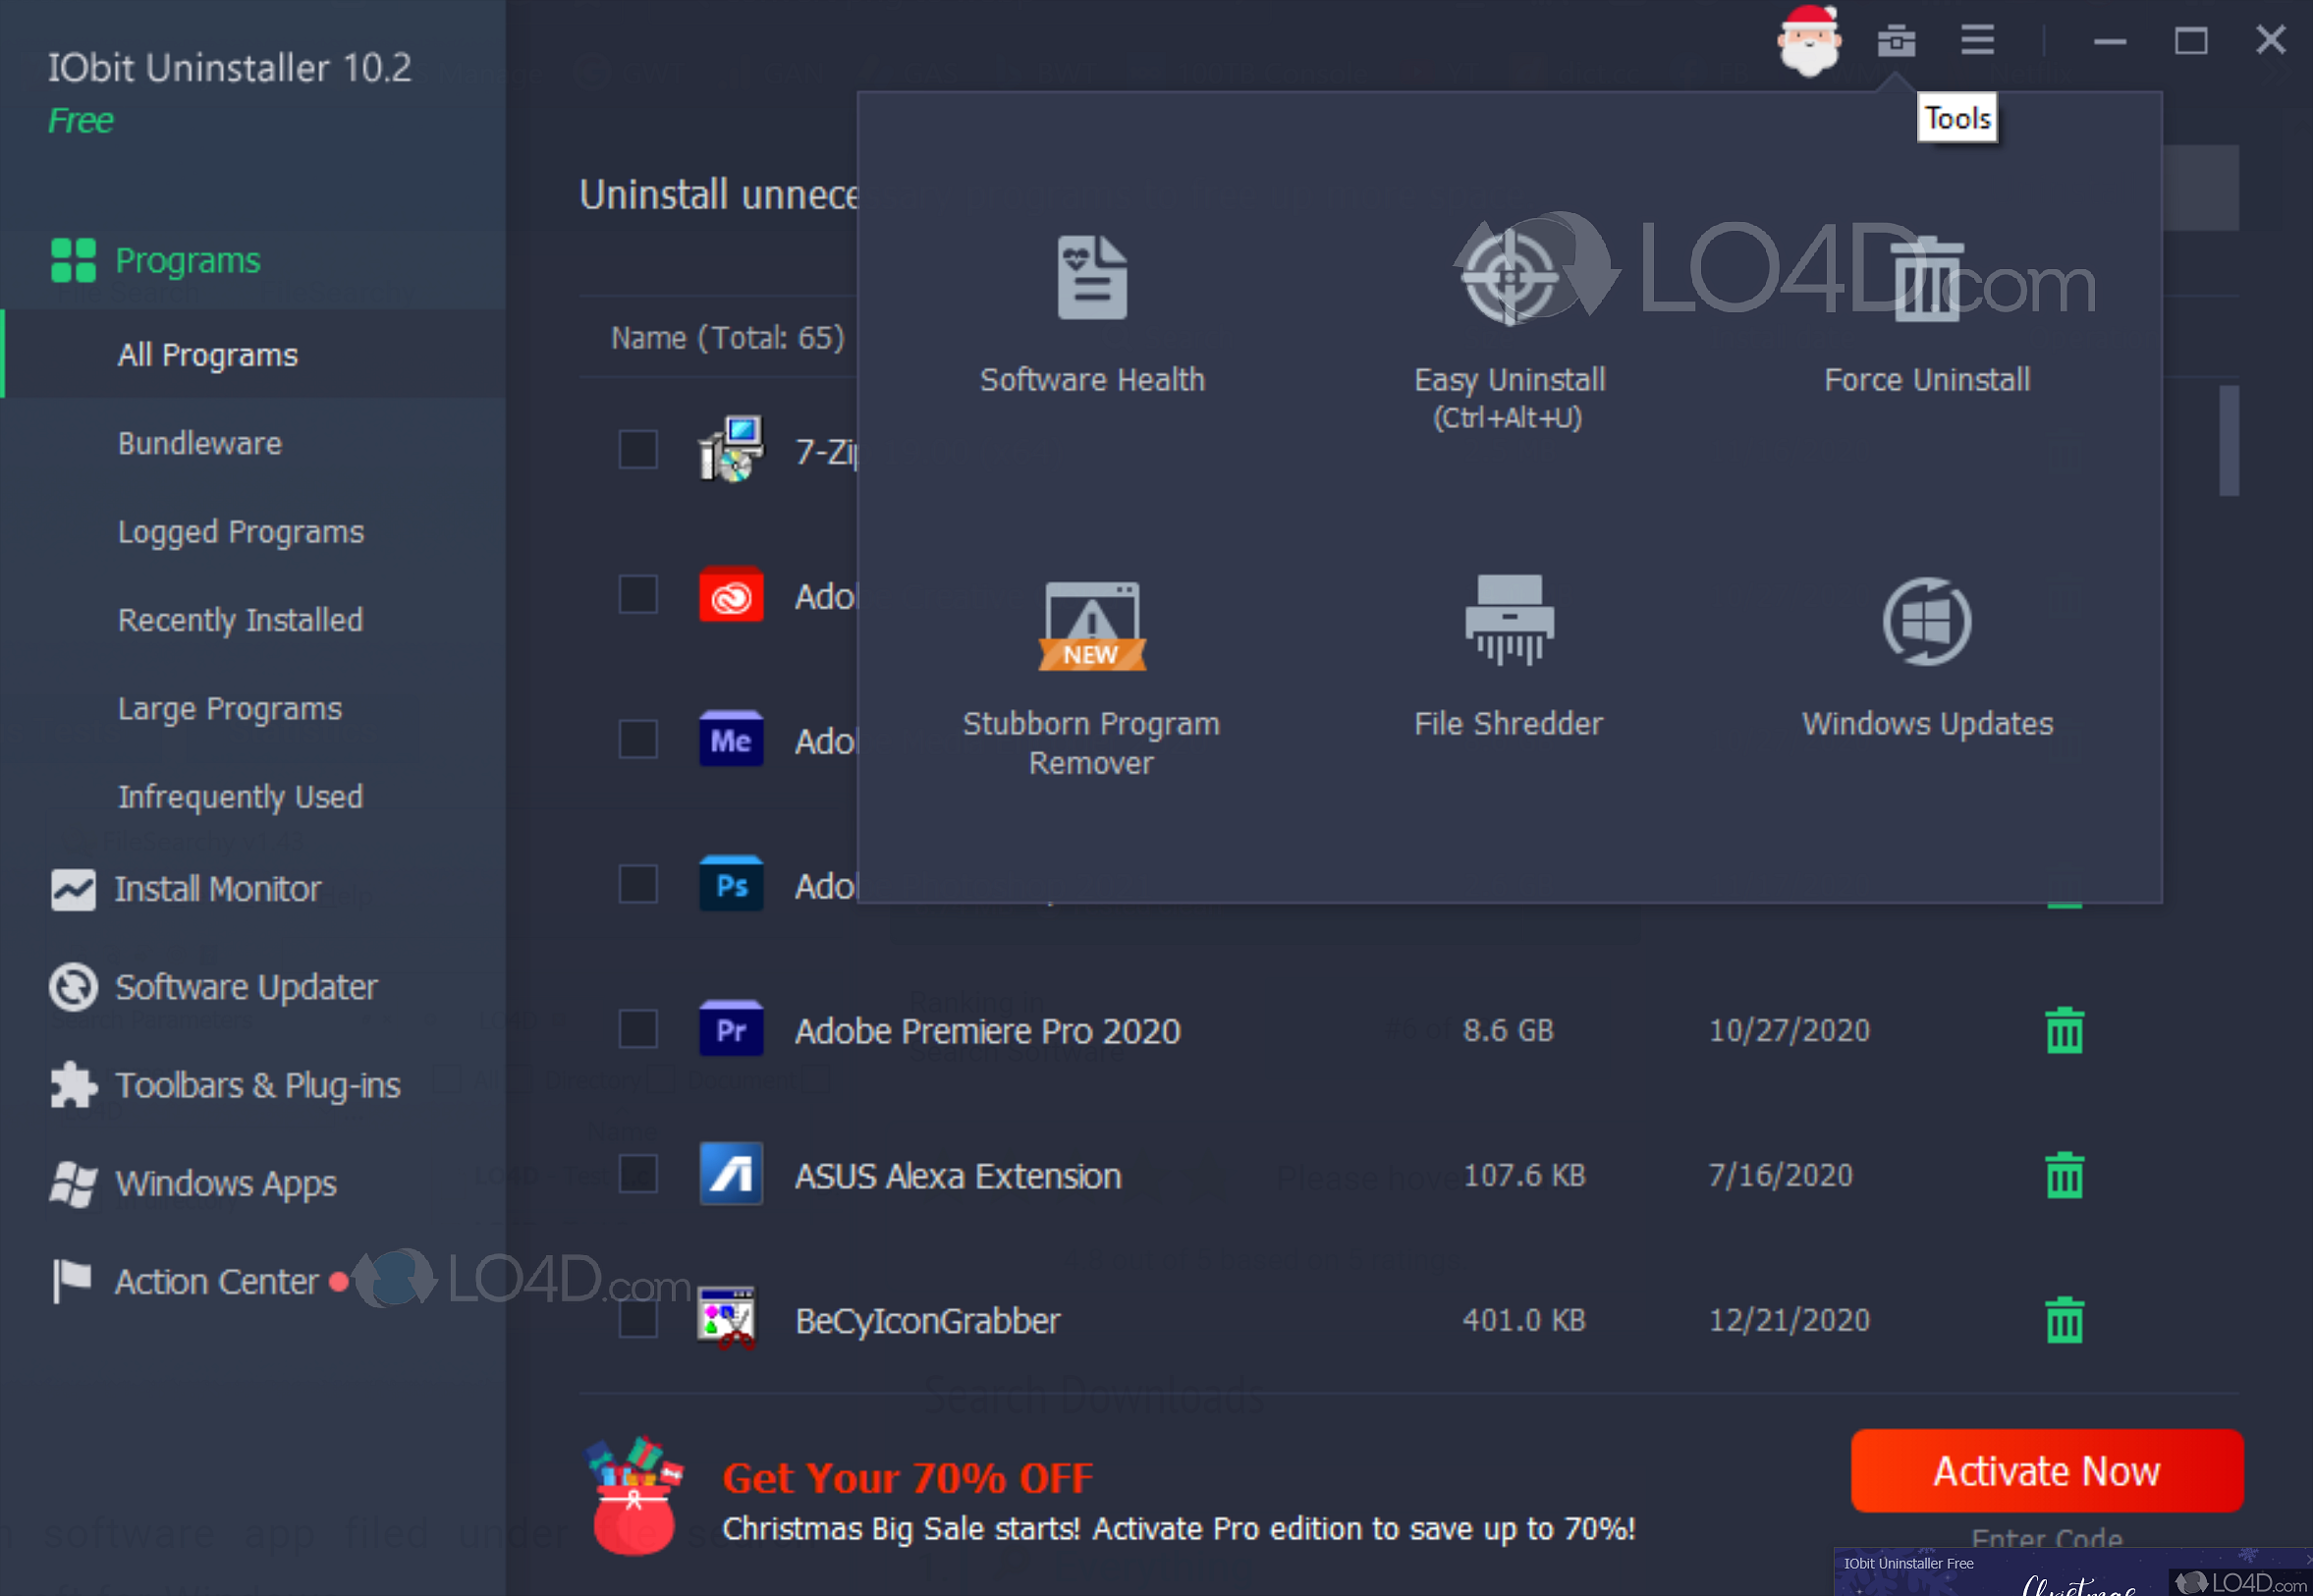 Iobit Uninstaller 7.4 PRO Key install and download free